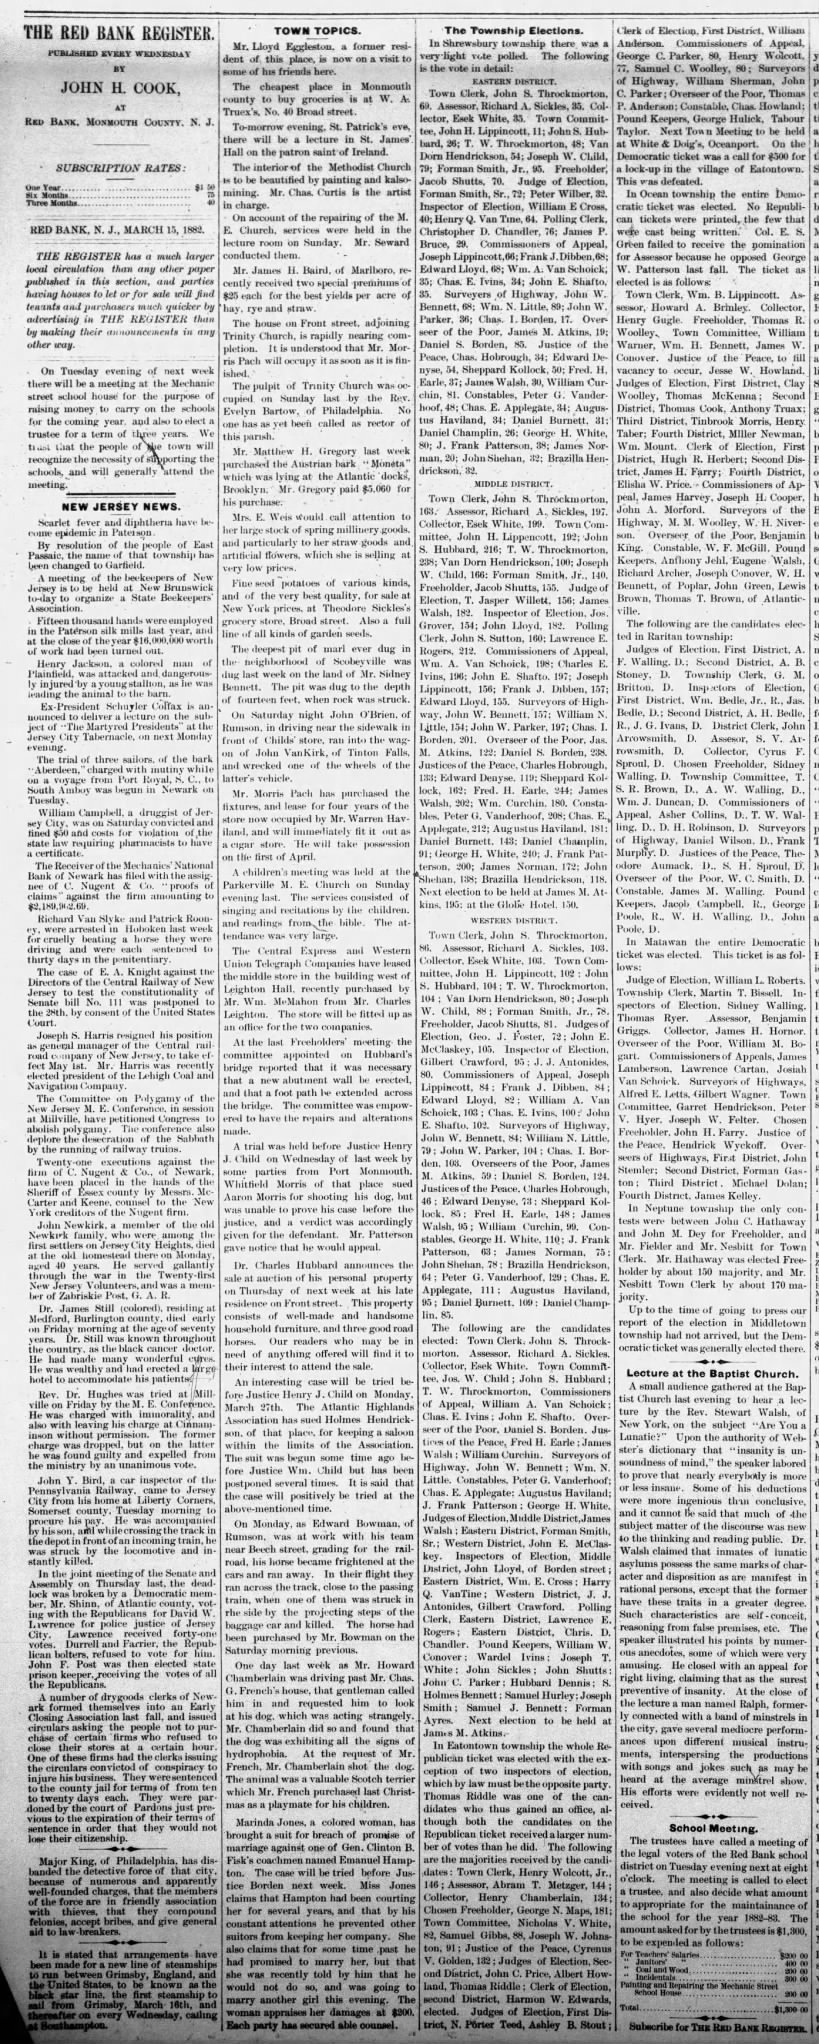 Bennetts in the news March 18 1882